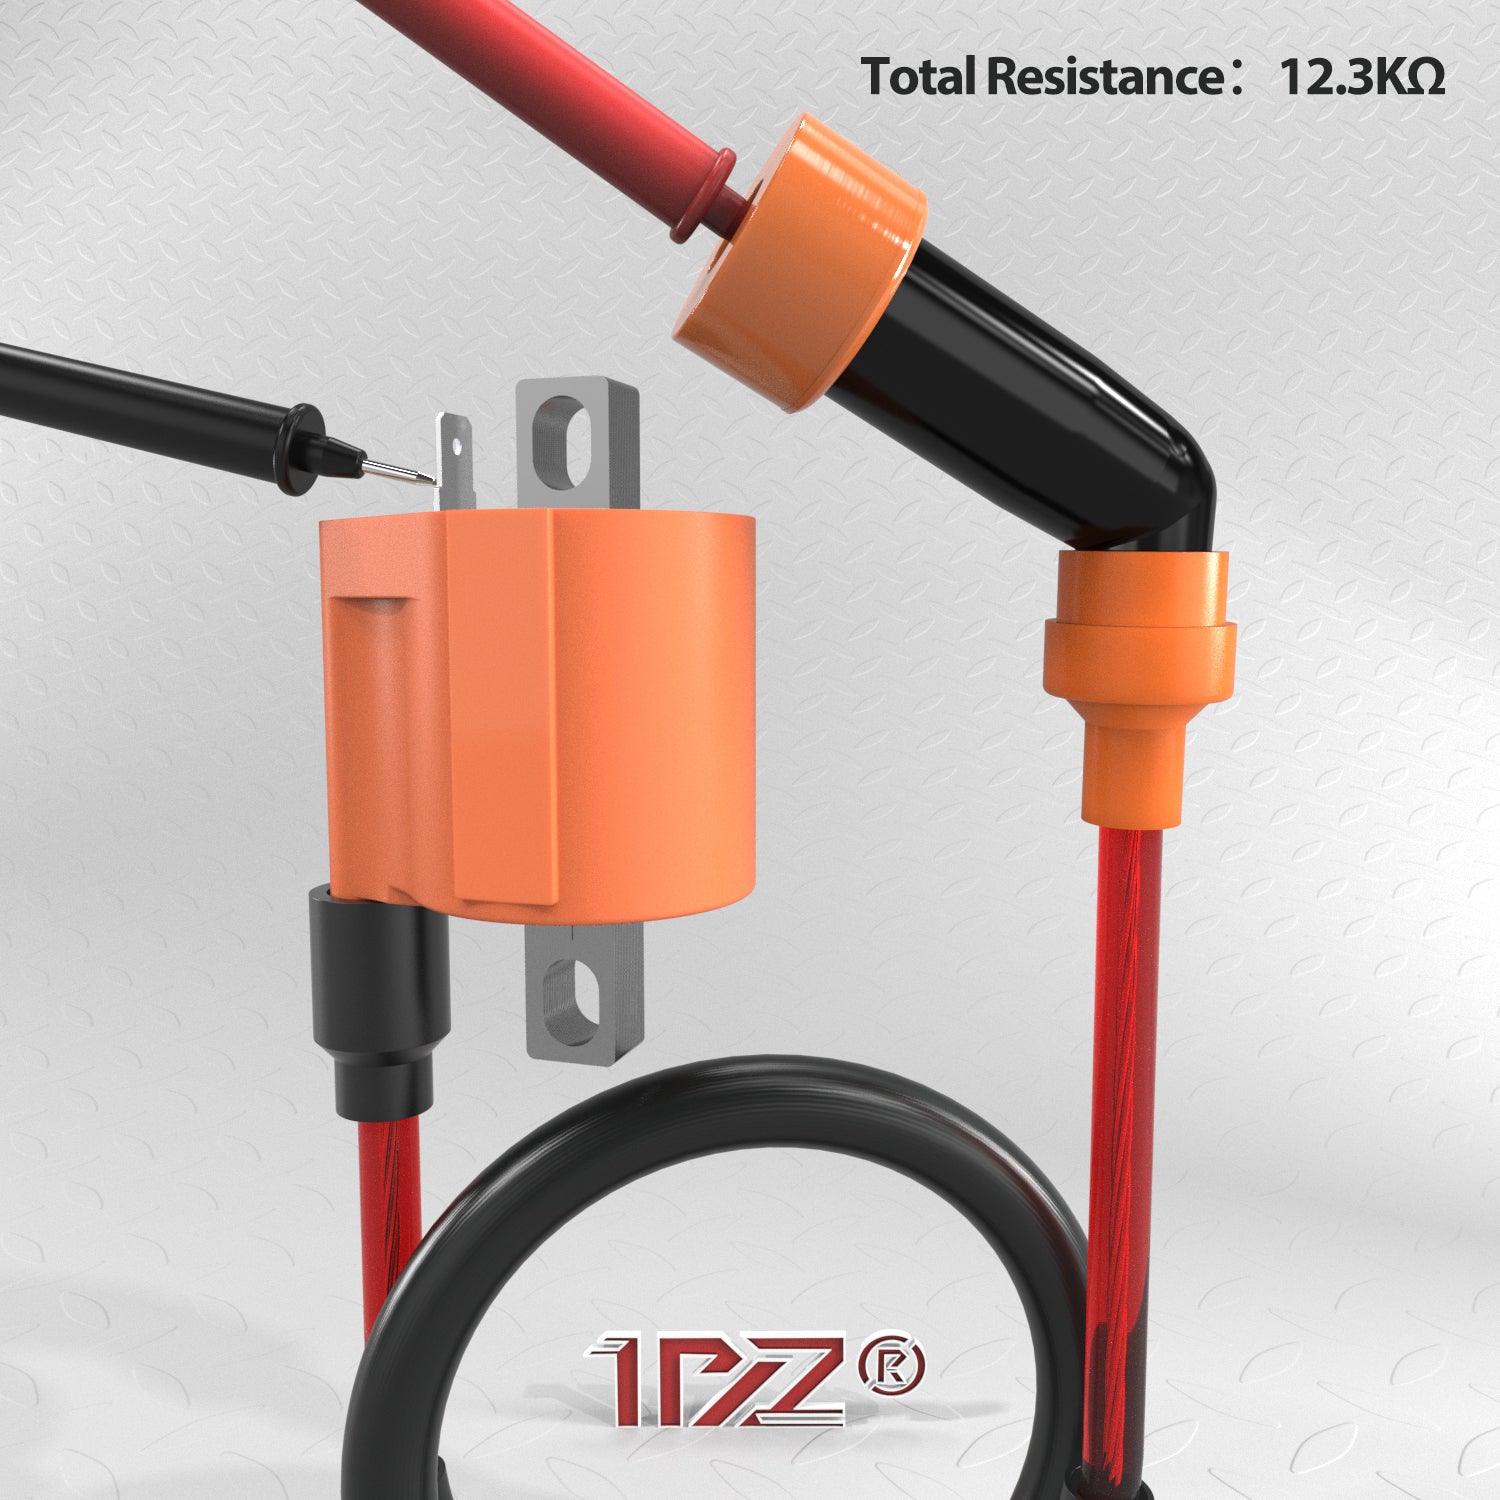 1PZ Ignition Coil Spark Plug CDI Box Replacement for Arctic Cat 250 300 2x4 4x4 1998-2005 3530-011 3530-012 3530-024 3530-025 0217-713